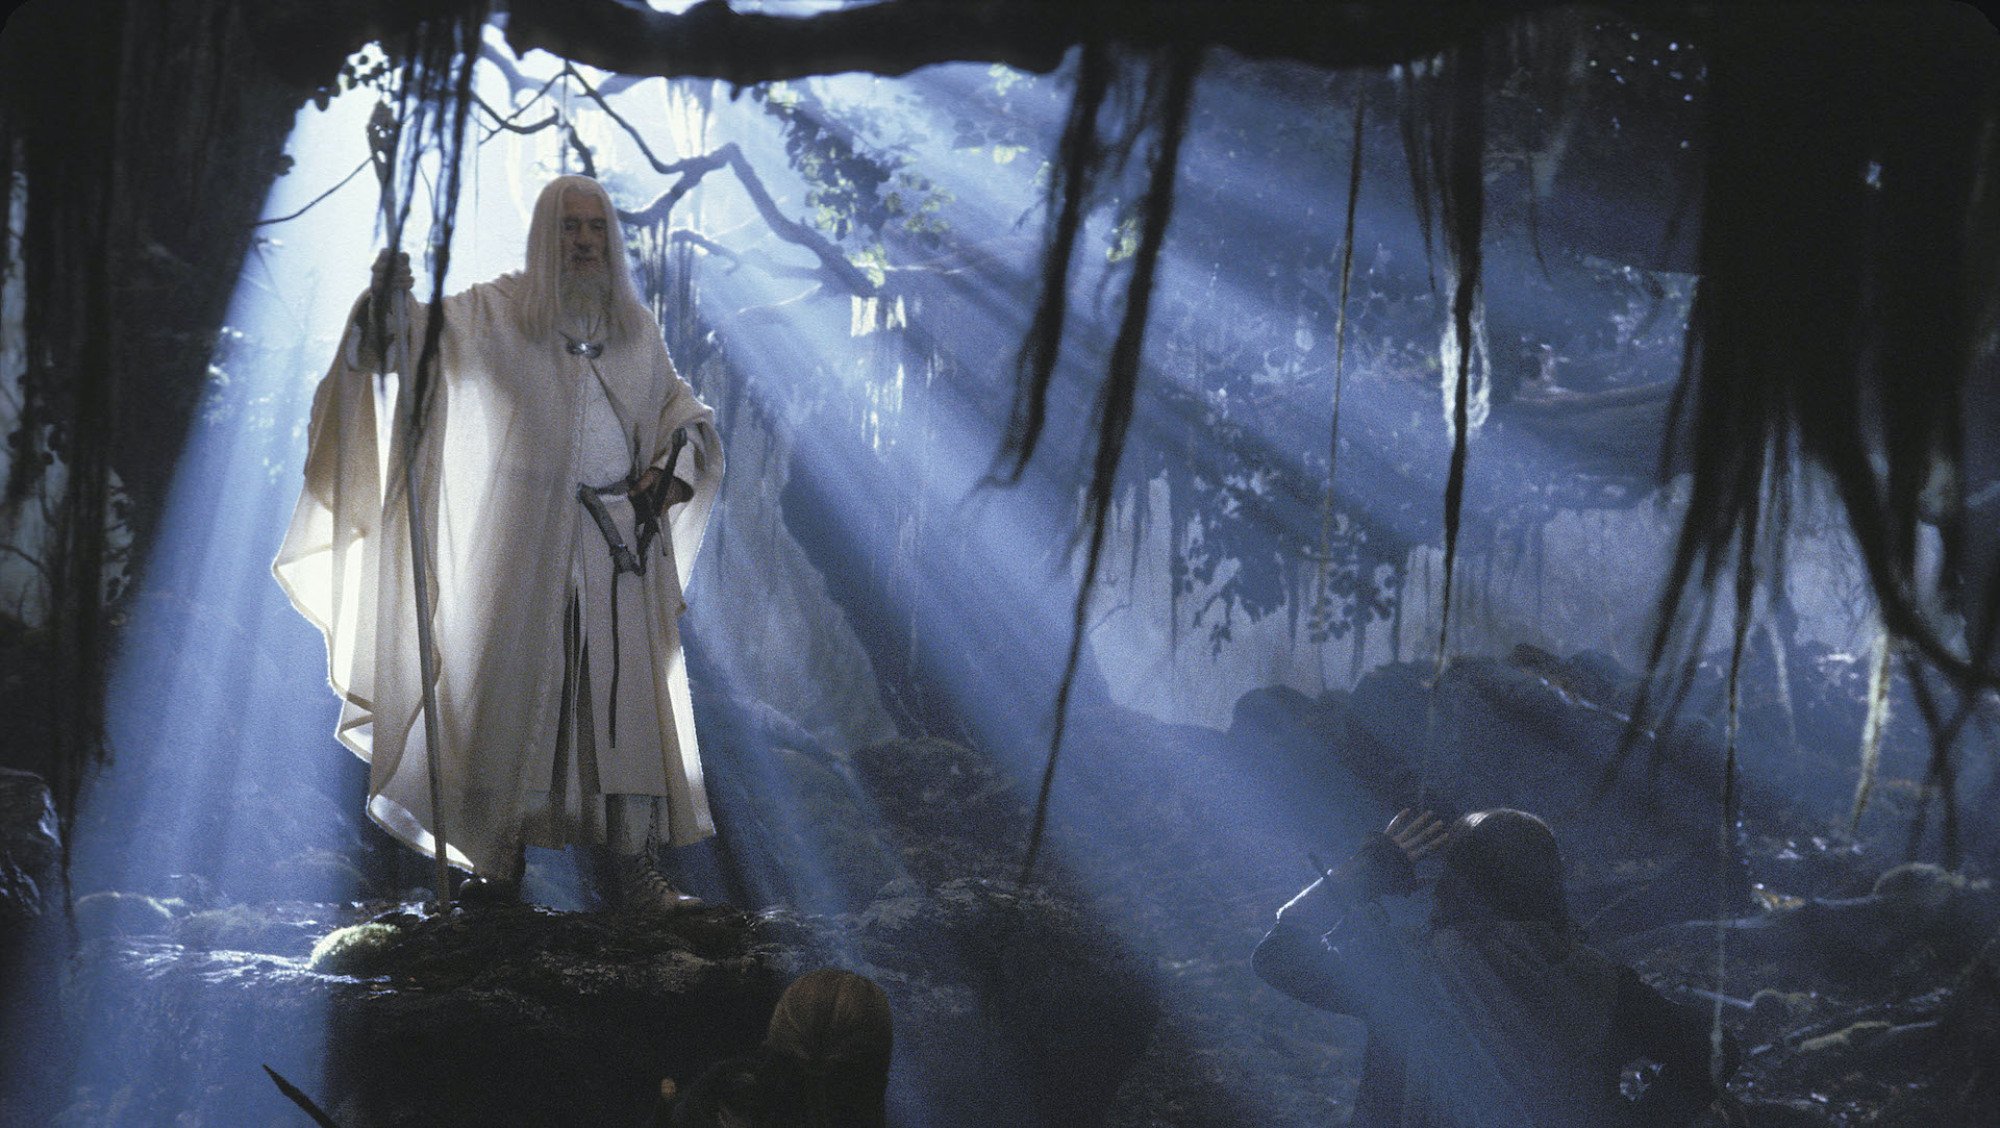 An older man draped in white robes and carrying a wizard's staff stands backlit in a forest.